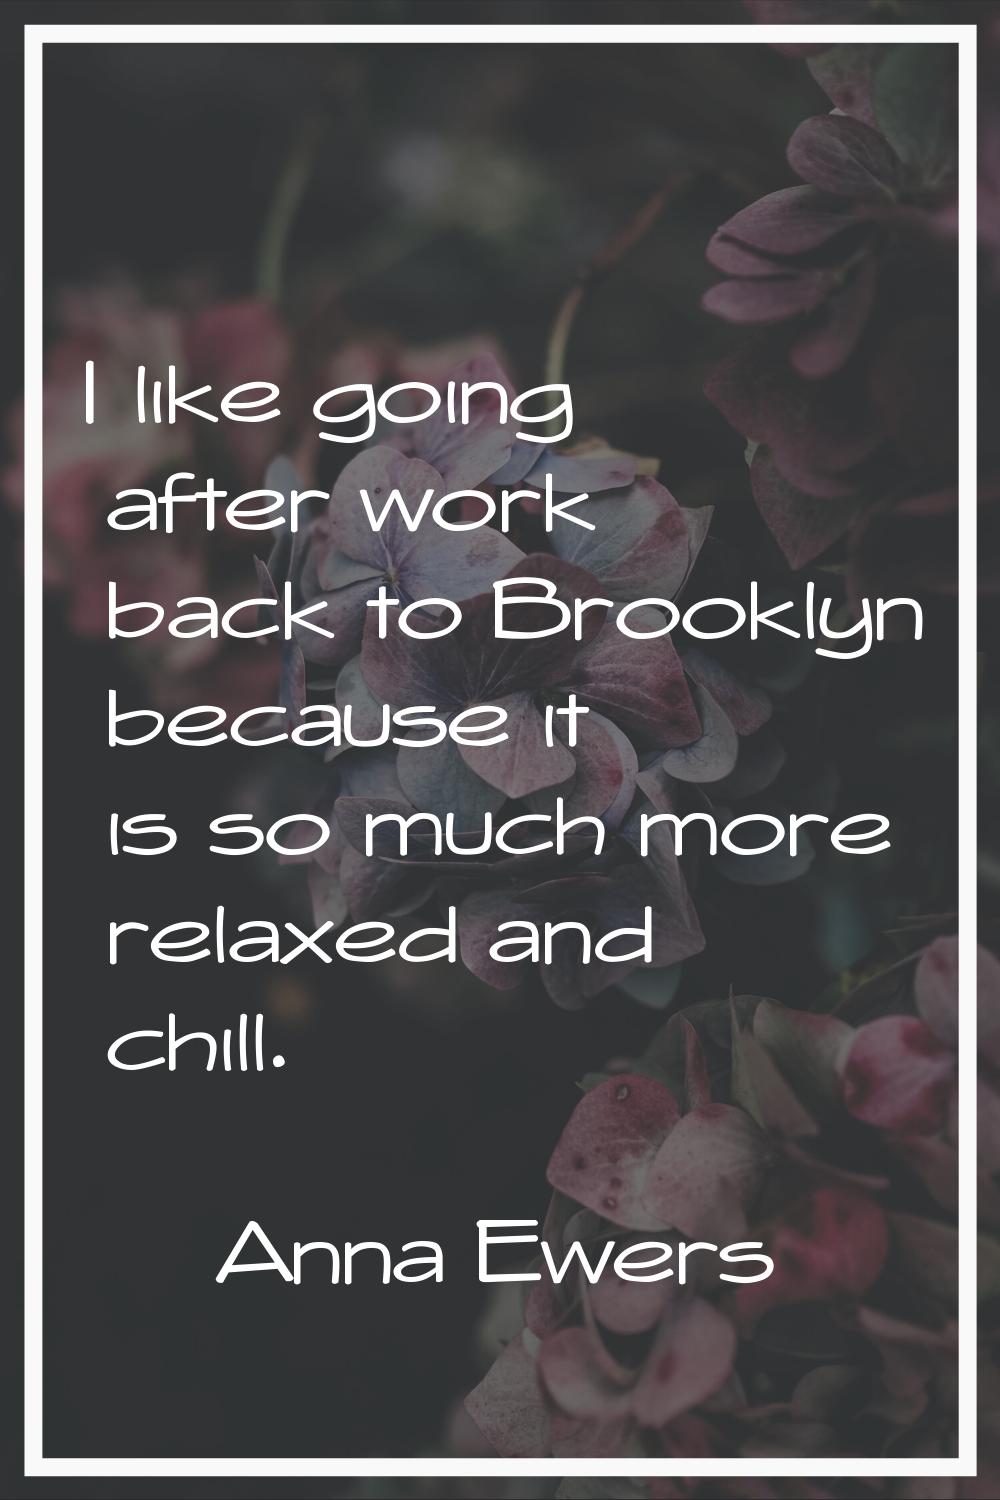 I like going after work back to Brooklyn because it is so much more relaxed and chill.